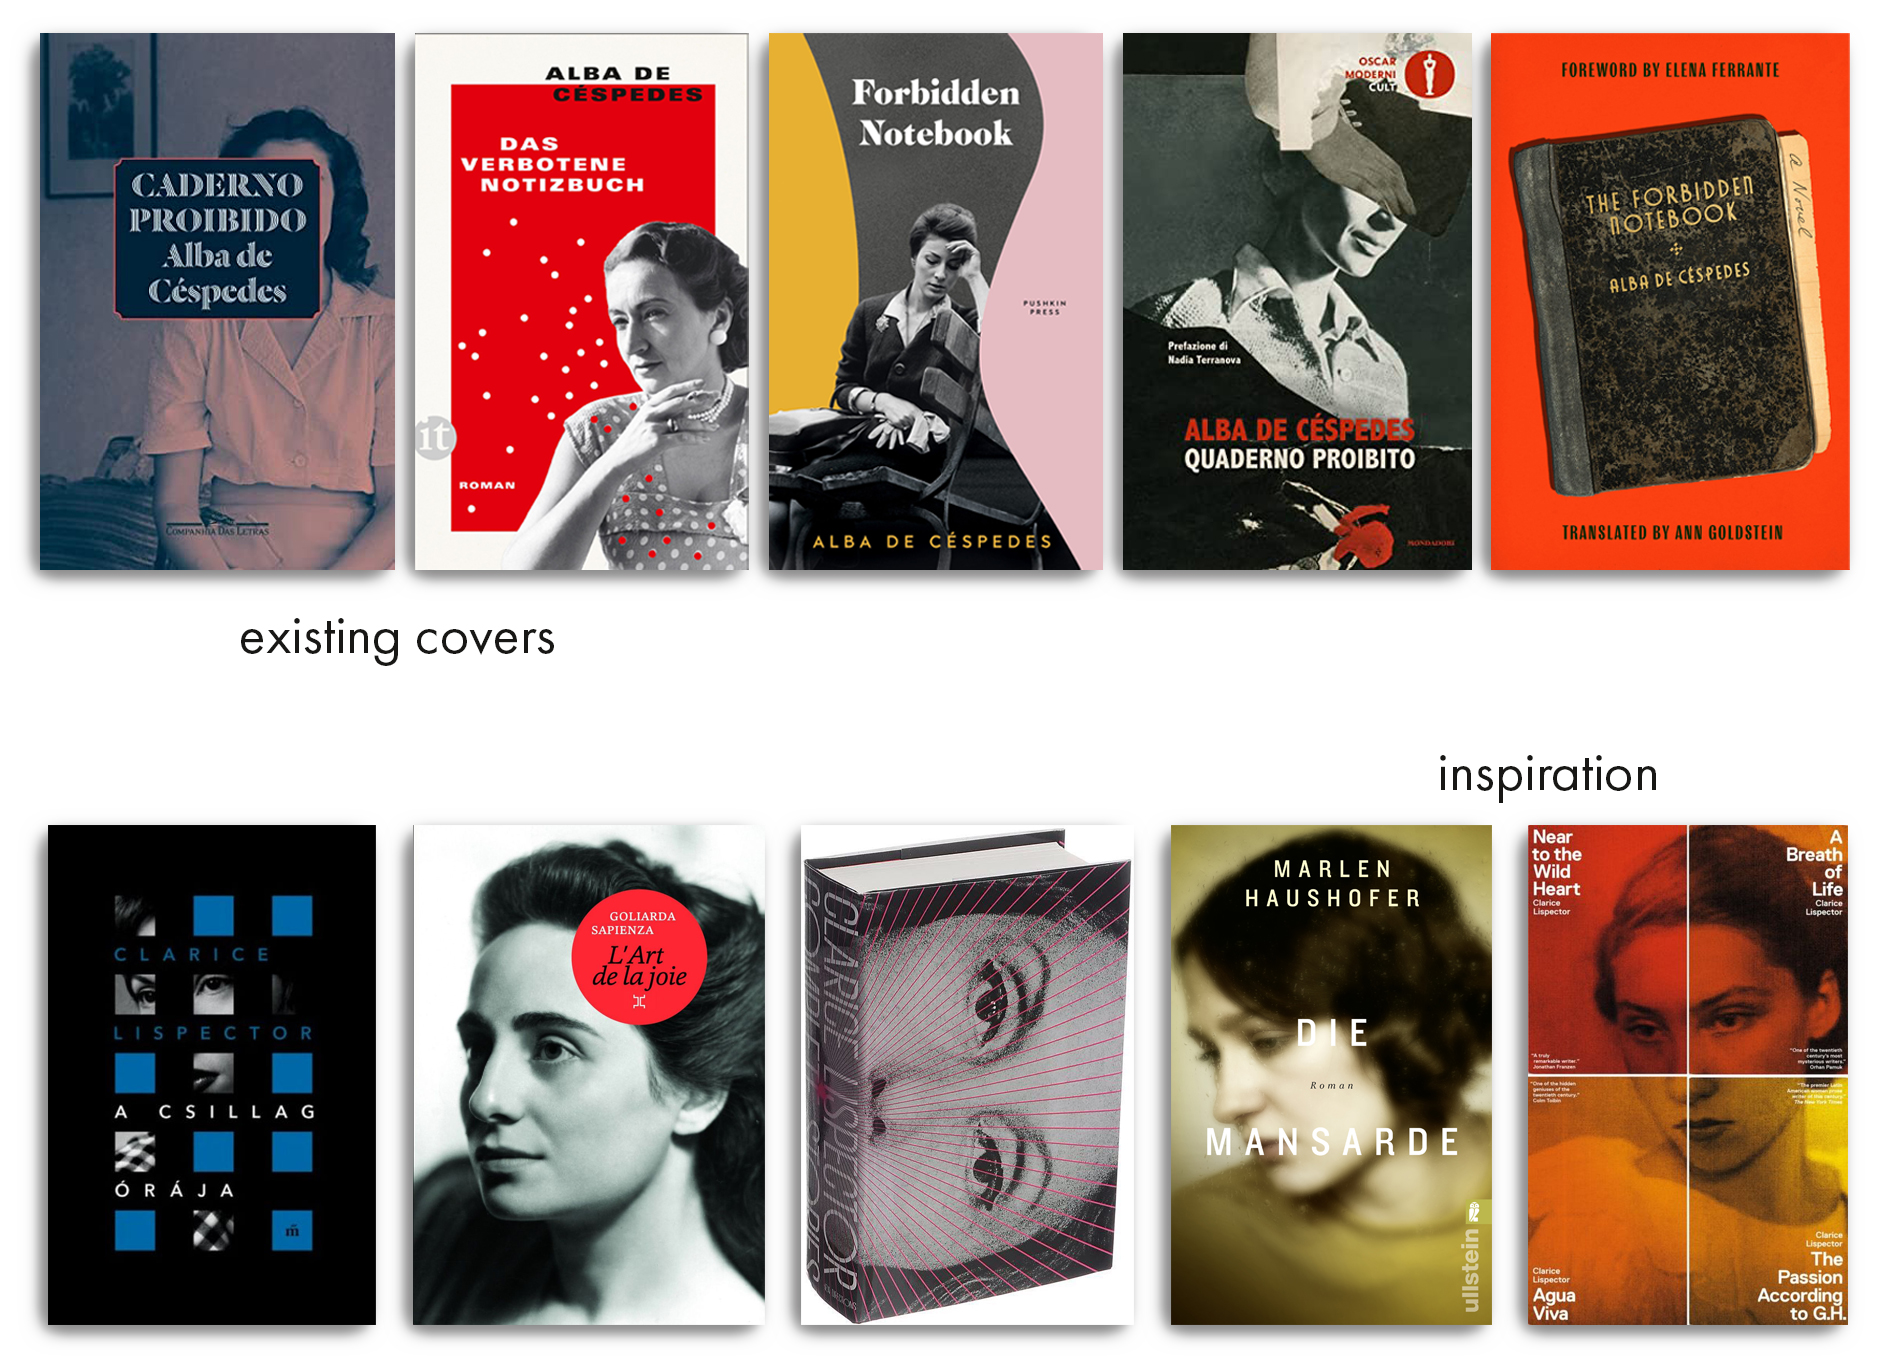 previous covers and inspiration